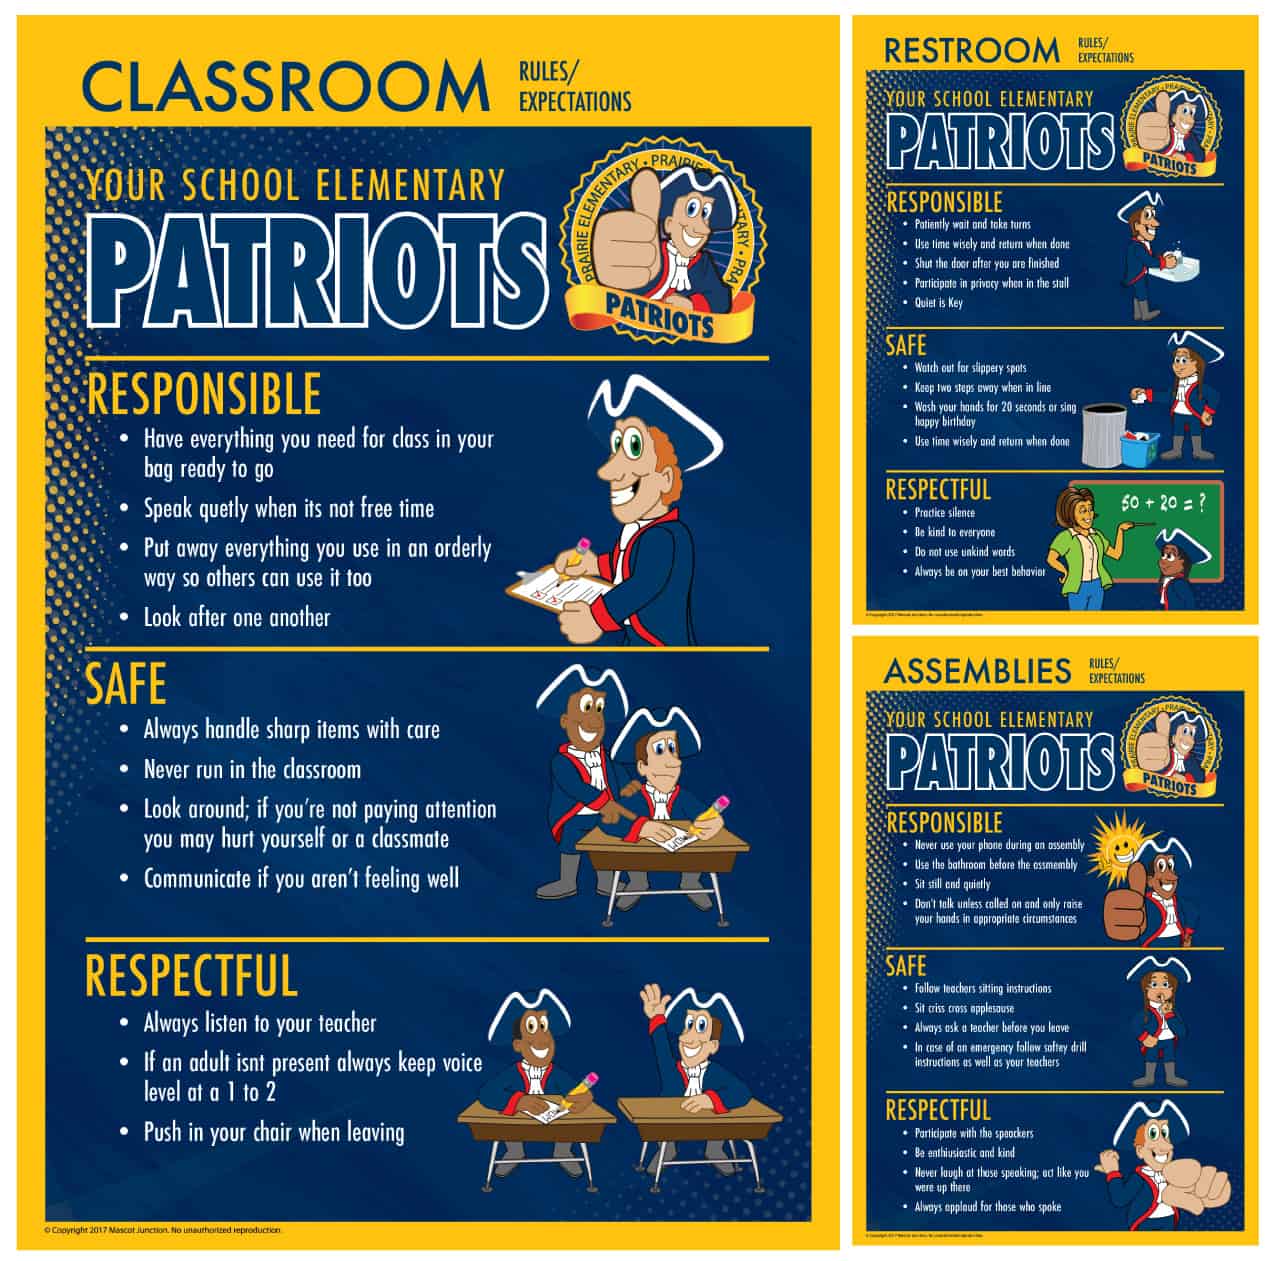 Rules-posters_Patriot